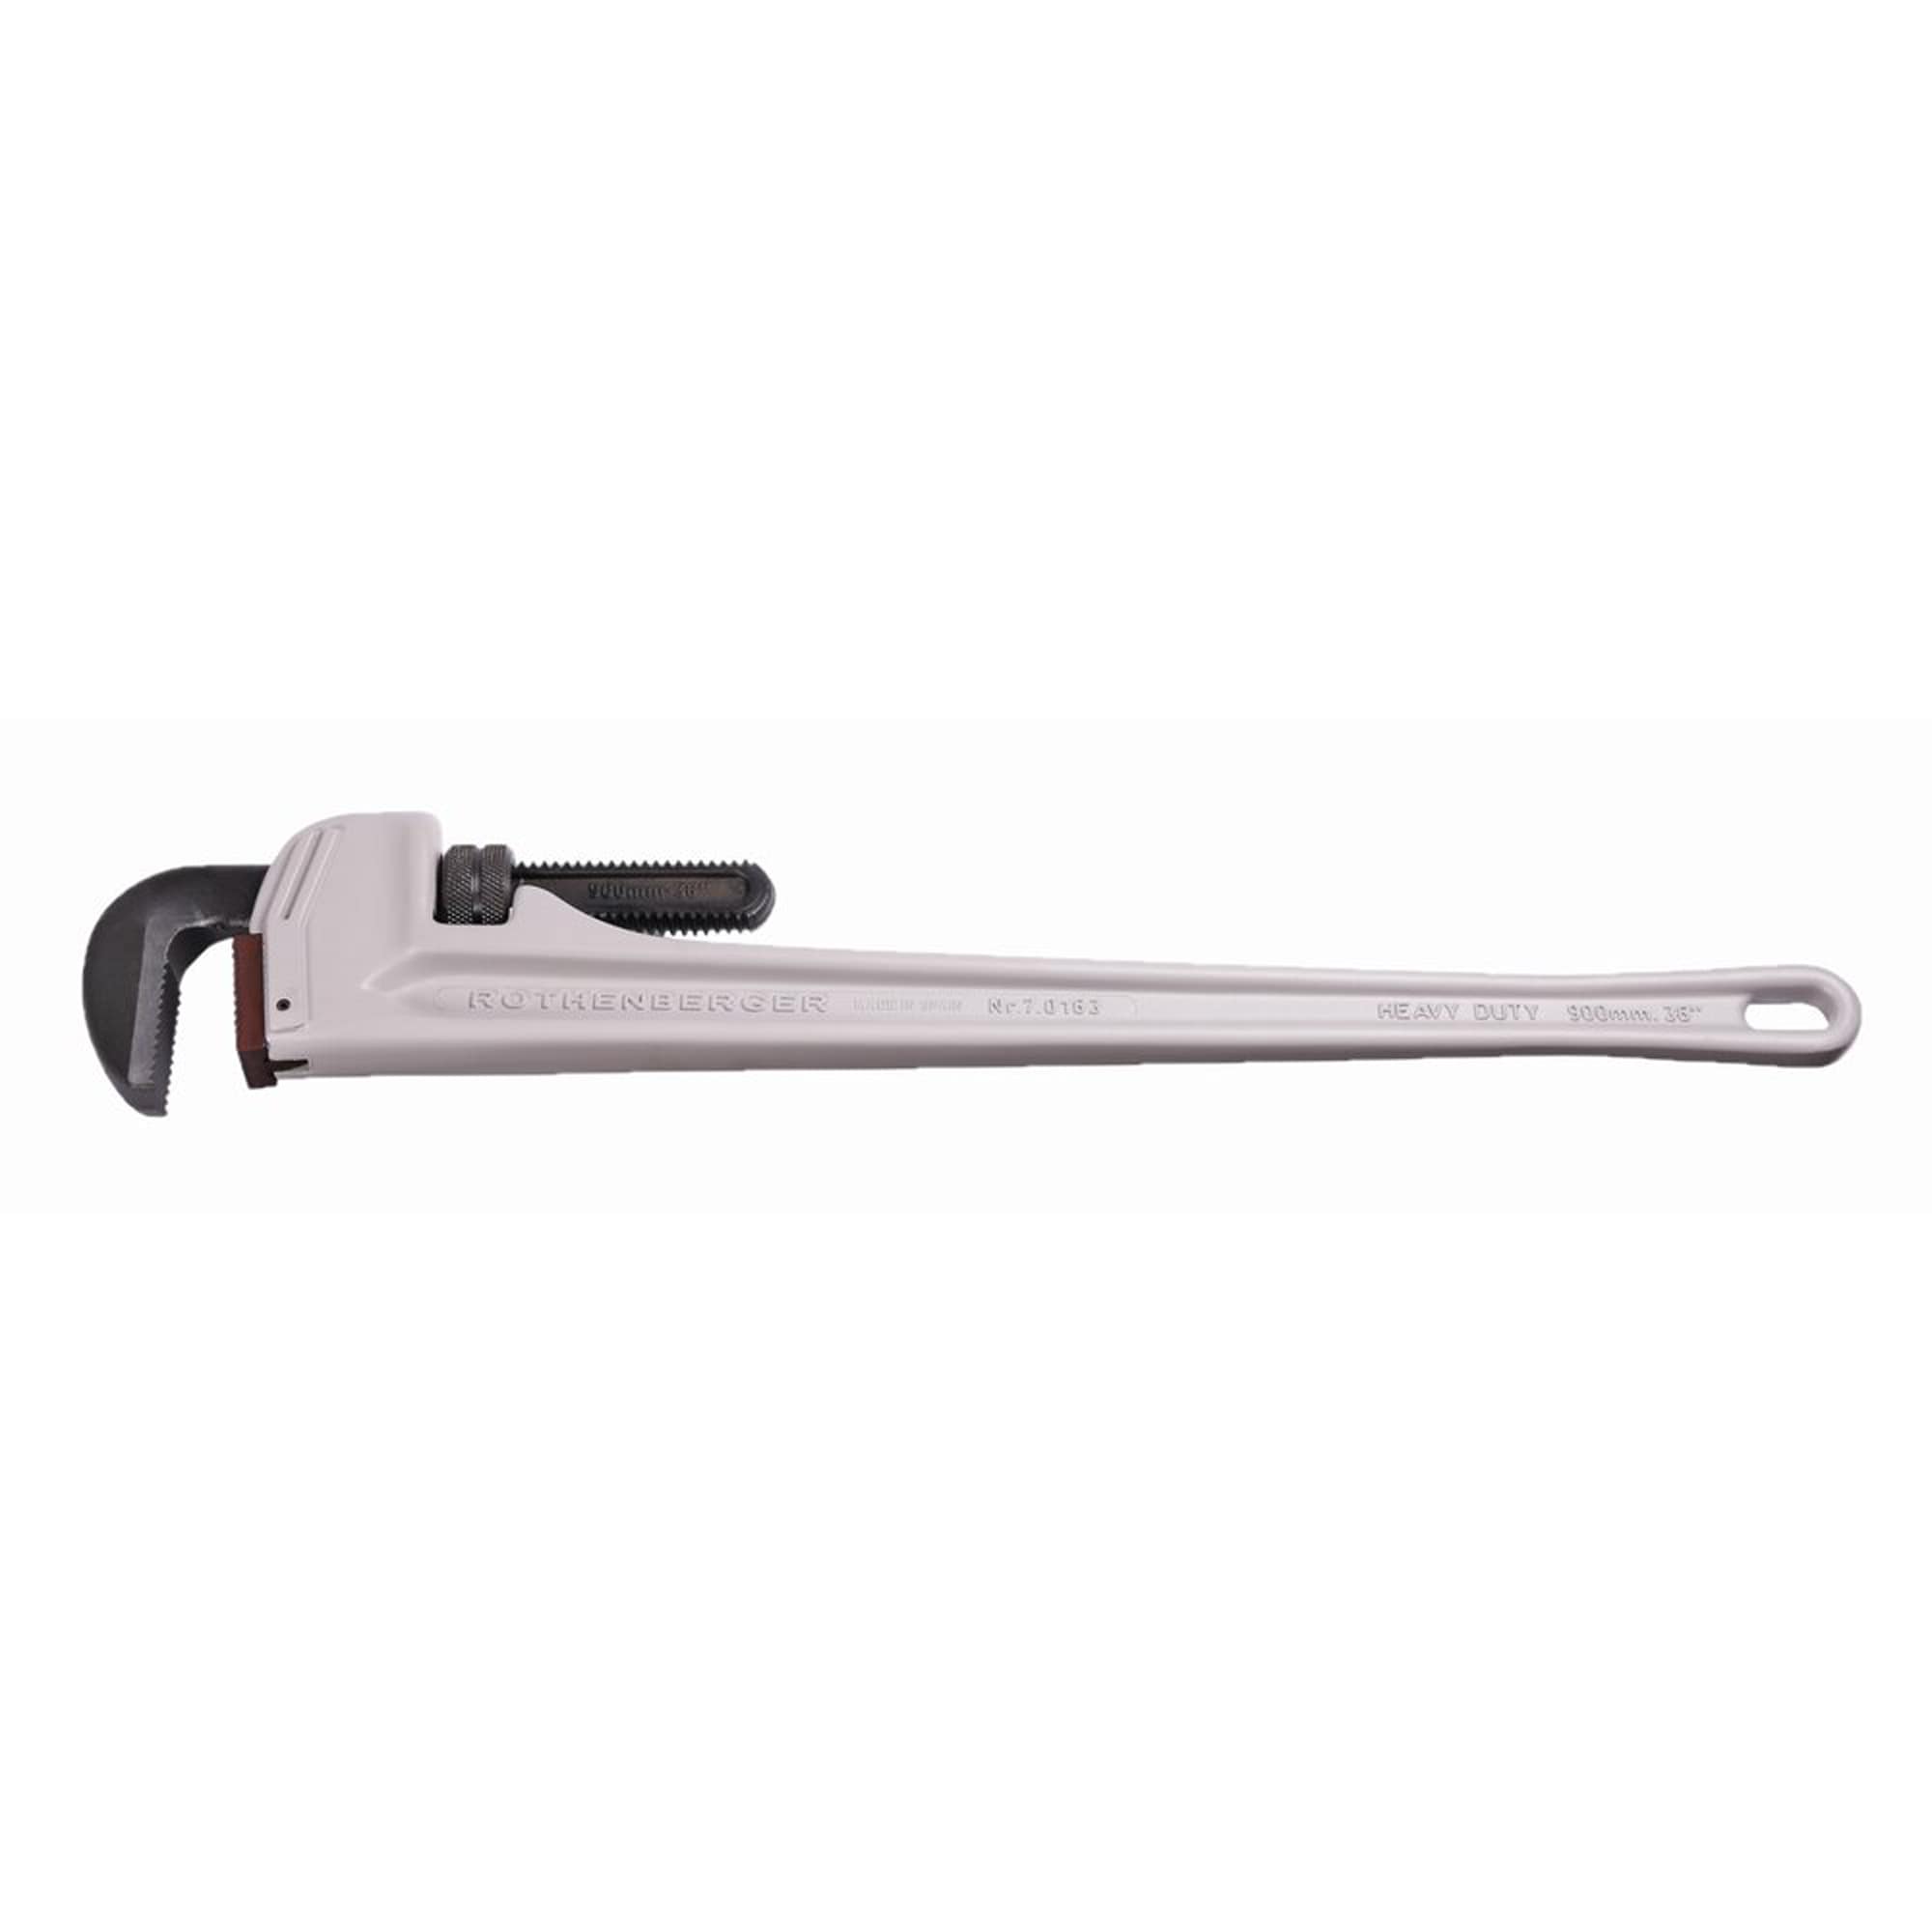 Rothenberger 36-in Aluminum Pipe Wrench, Adjustable, 0.5-5-in Pipe